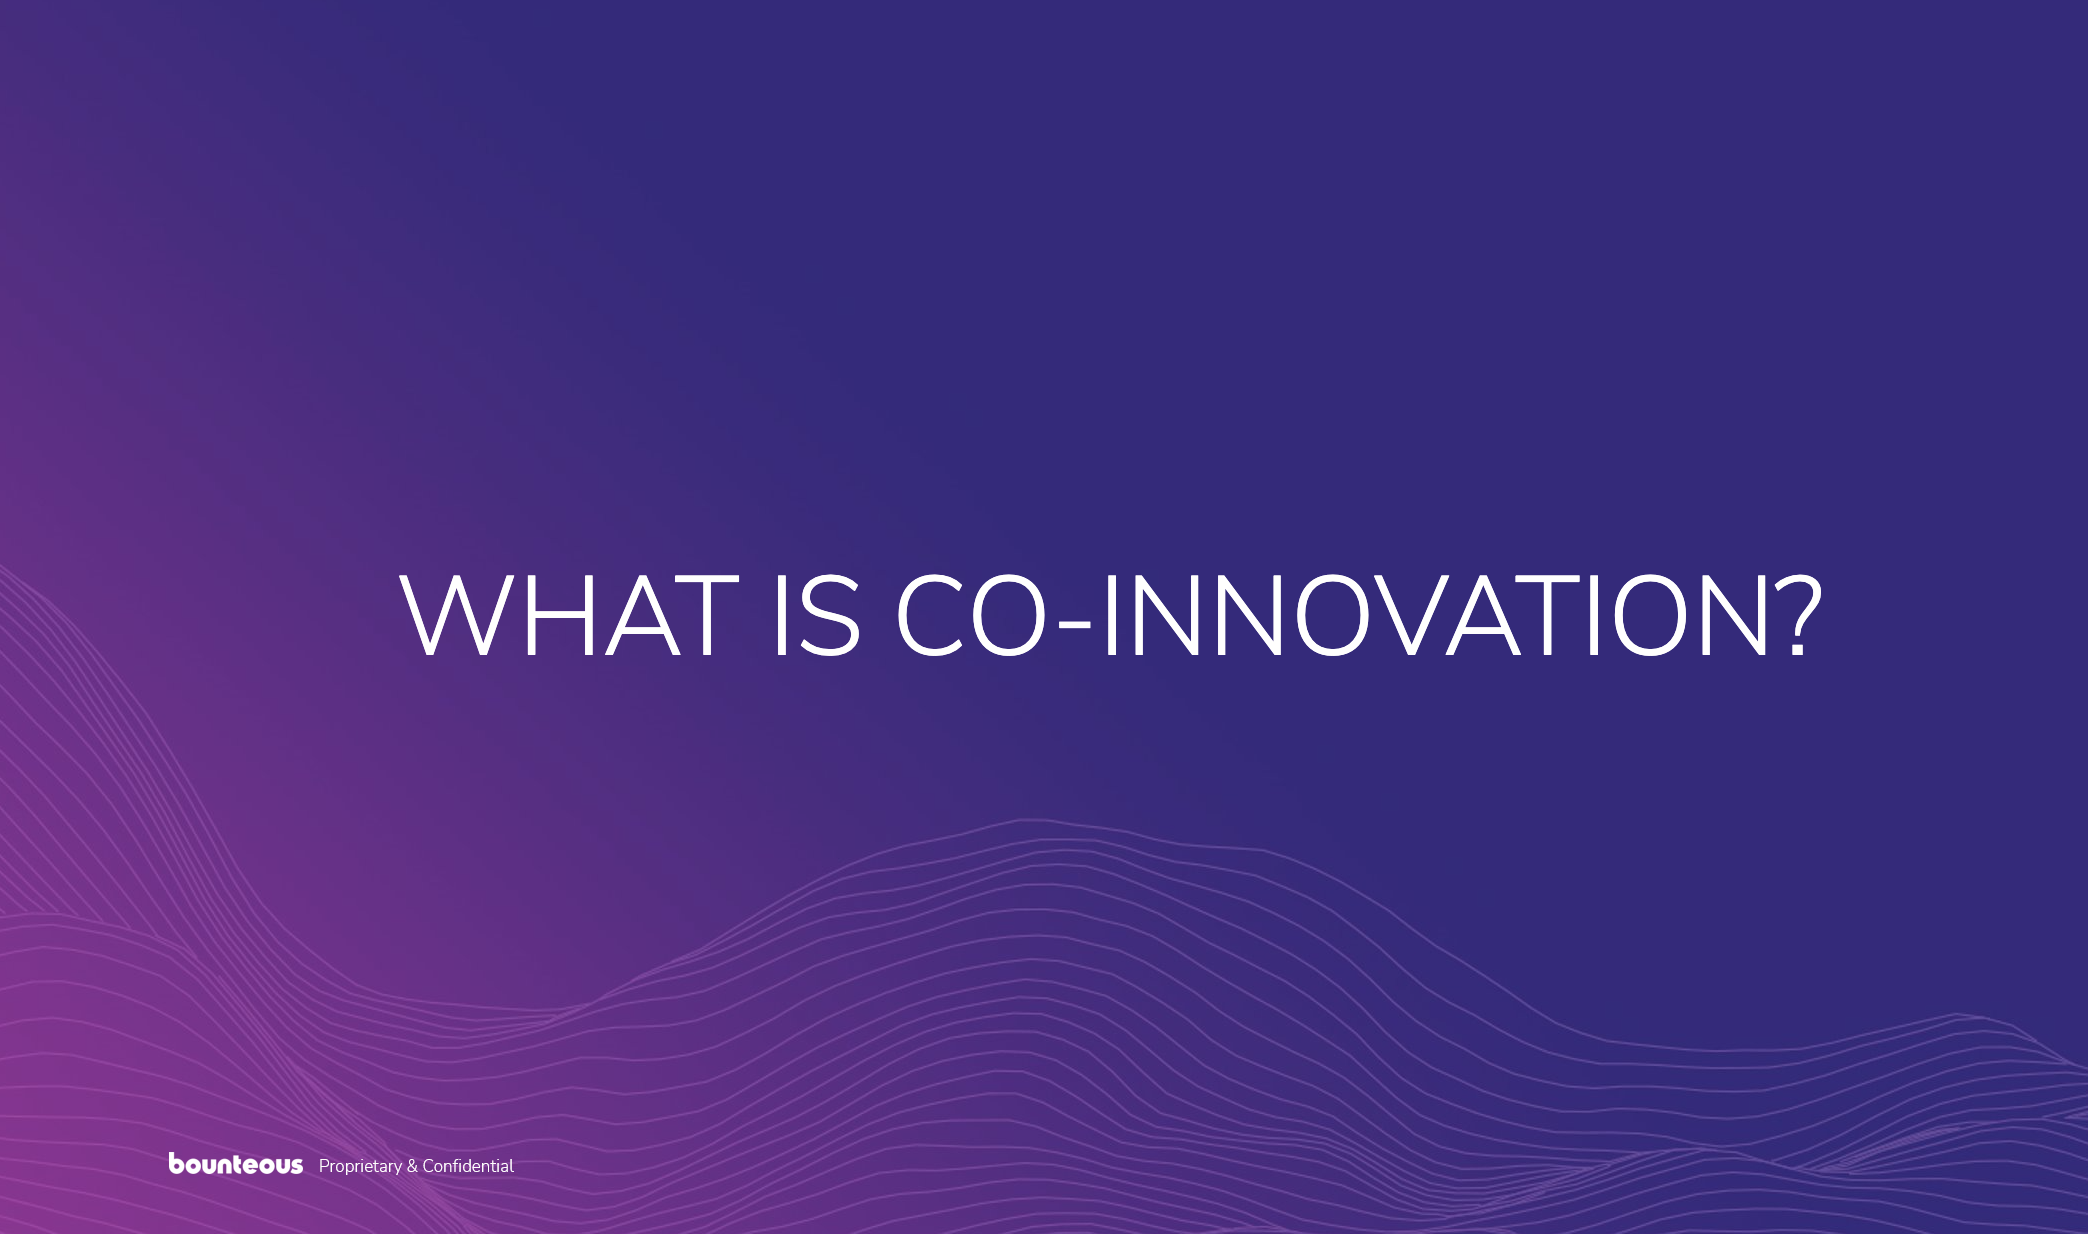 What Is Co-Innovation?